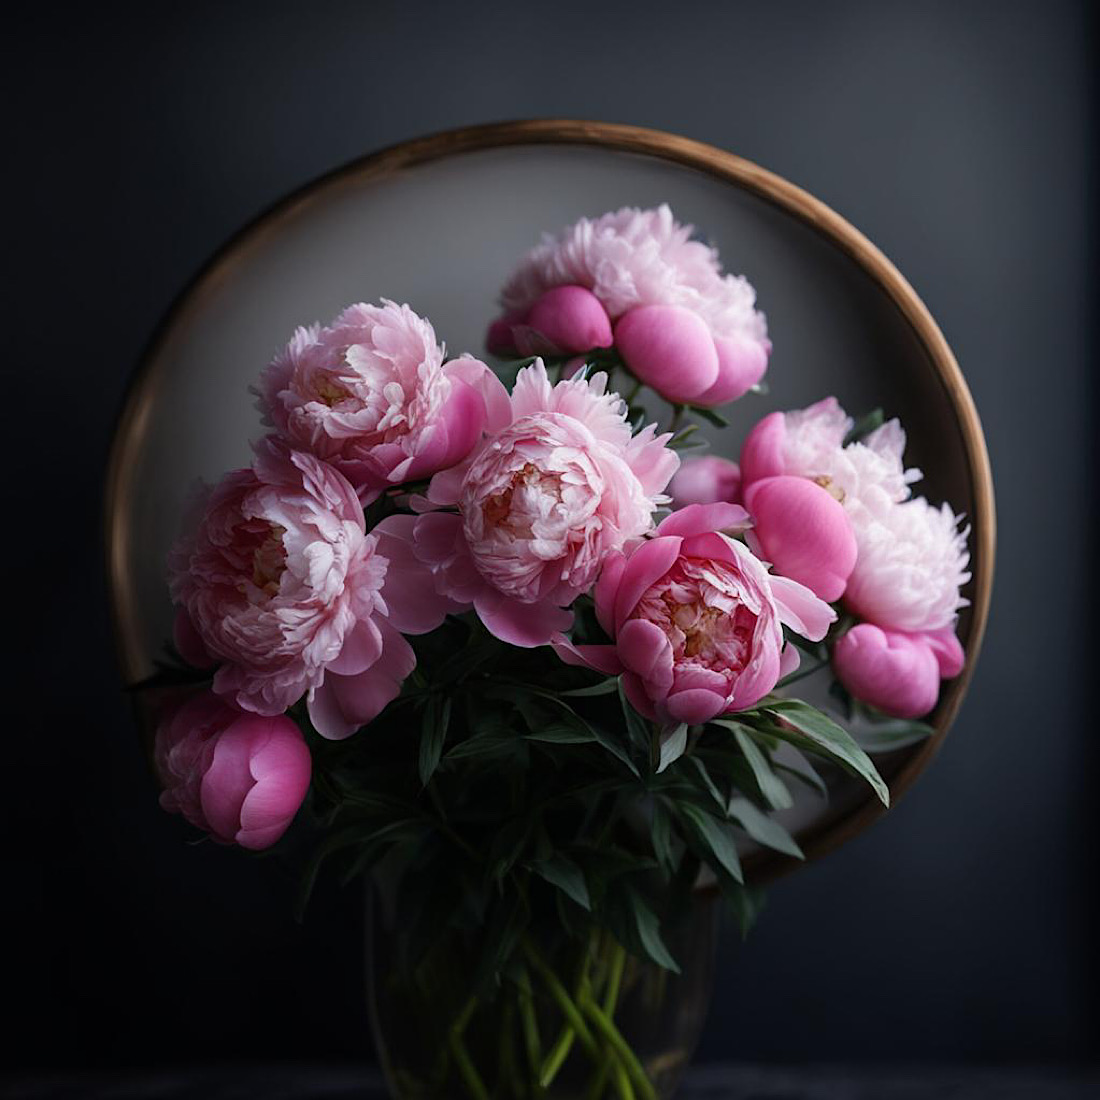 A bouquet of peonies preview image.